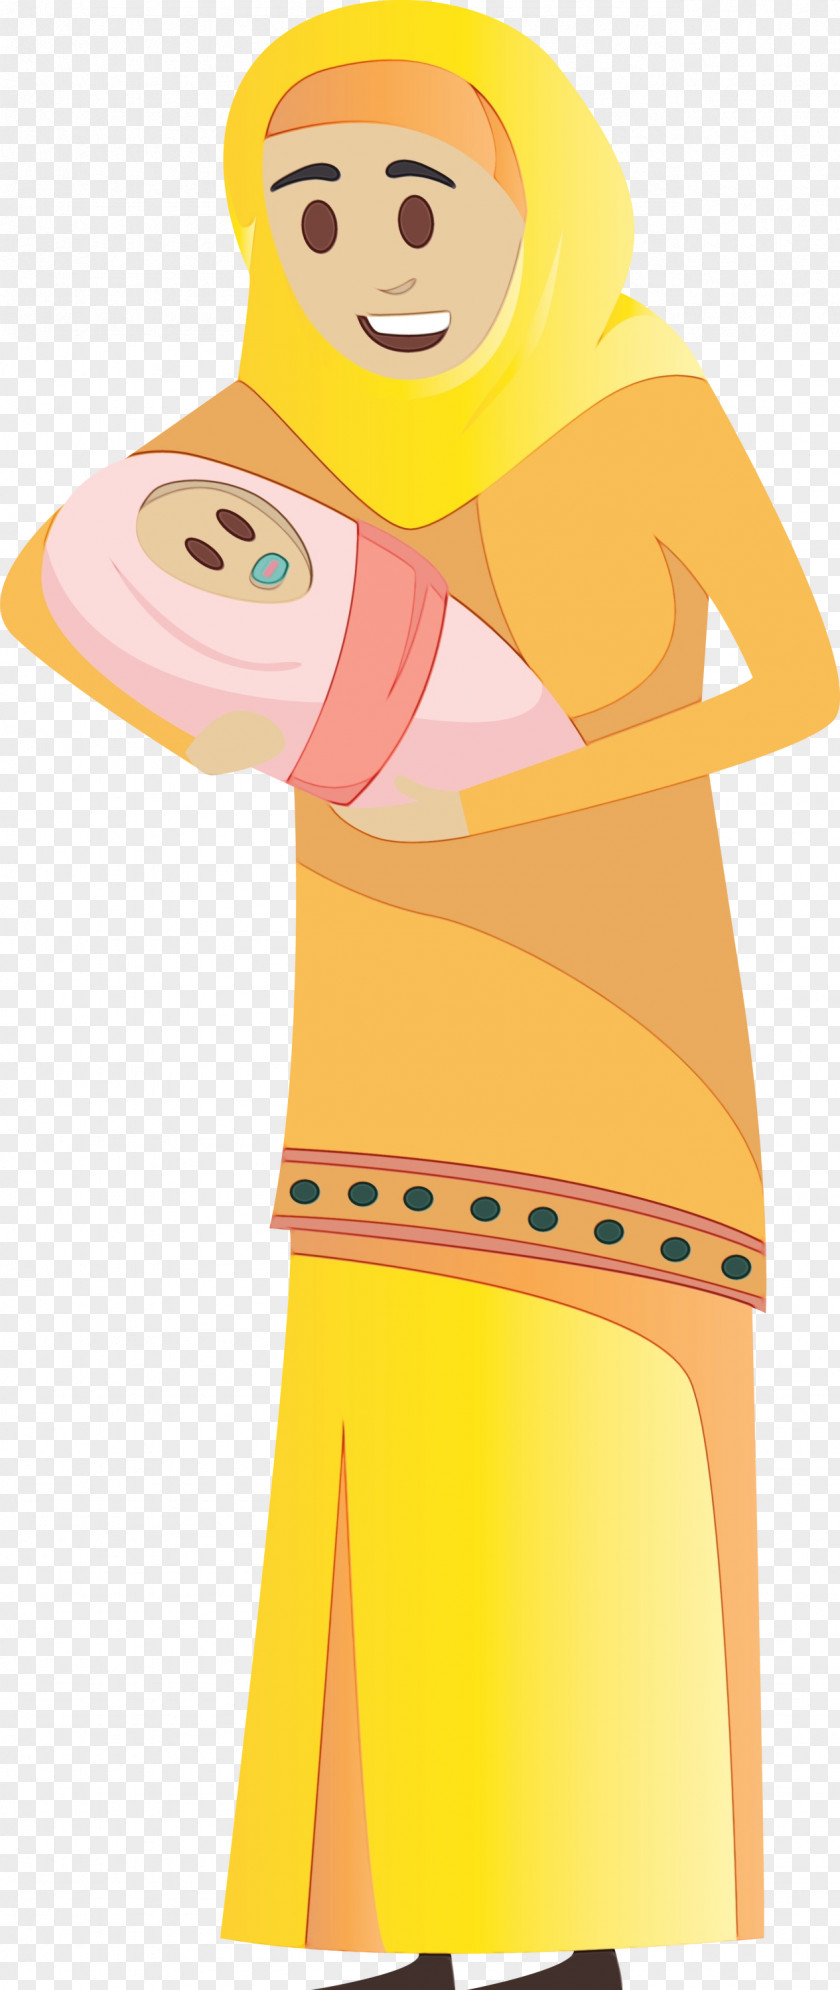 Yellow Cartoon Neck Style PNG